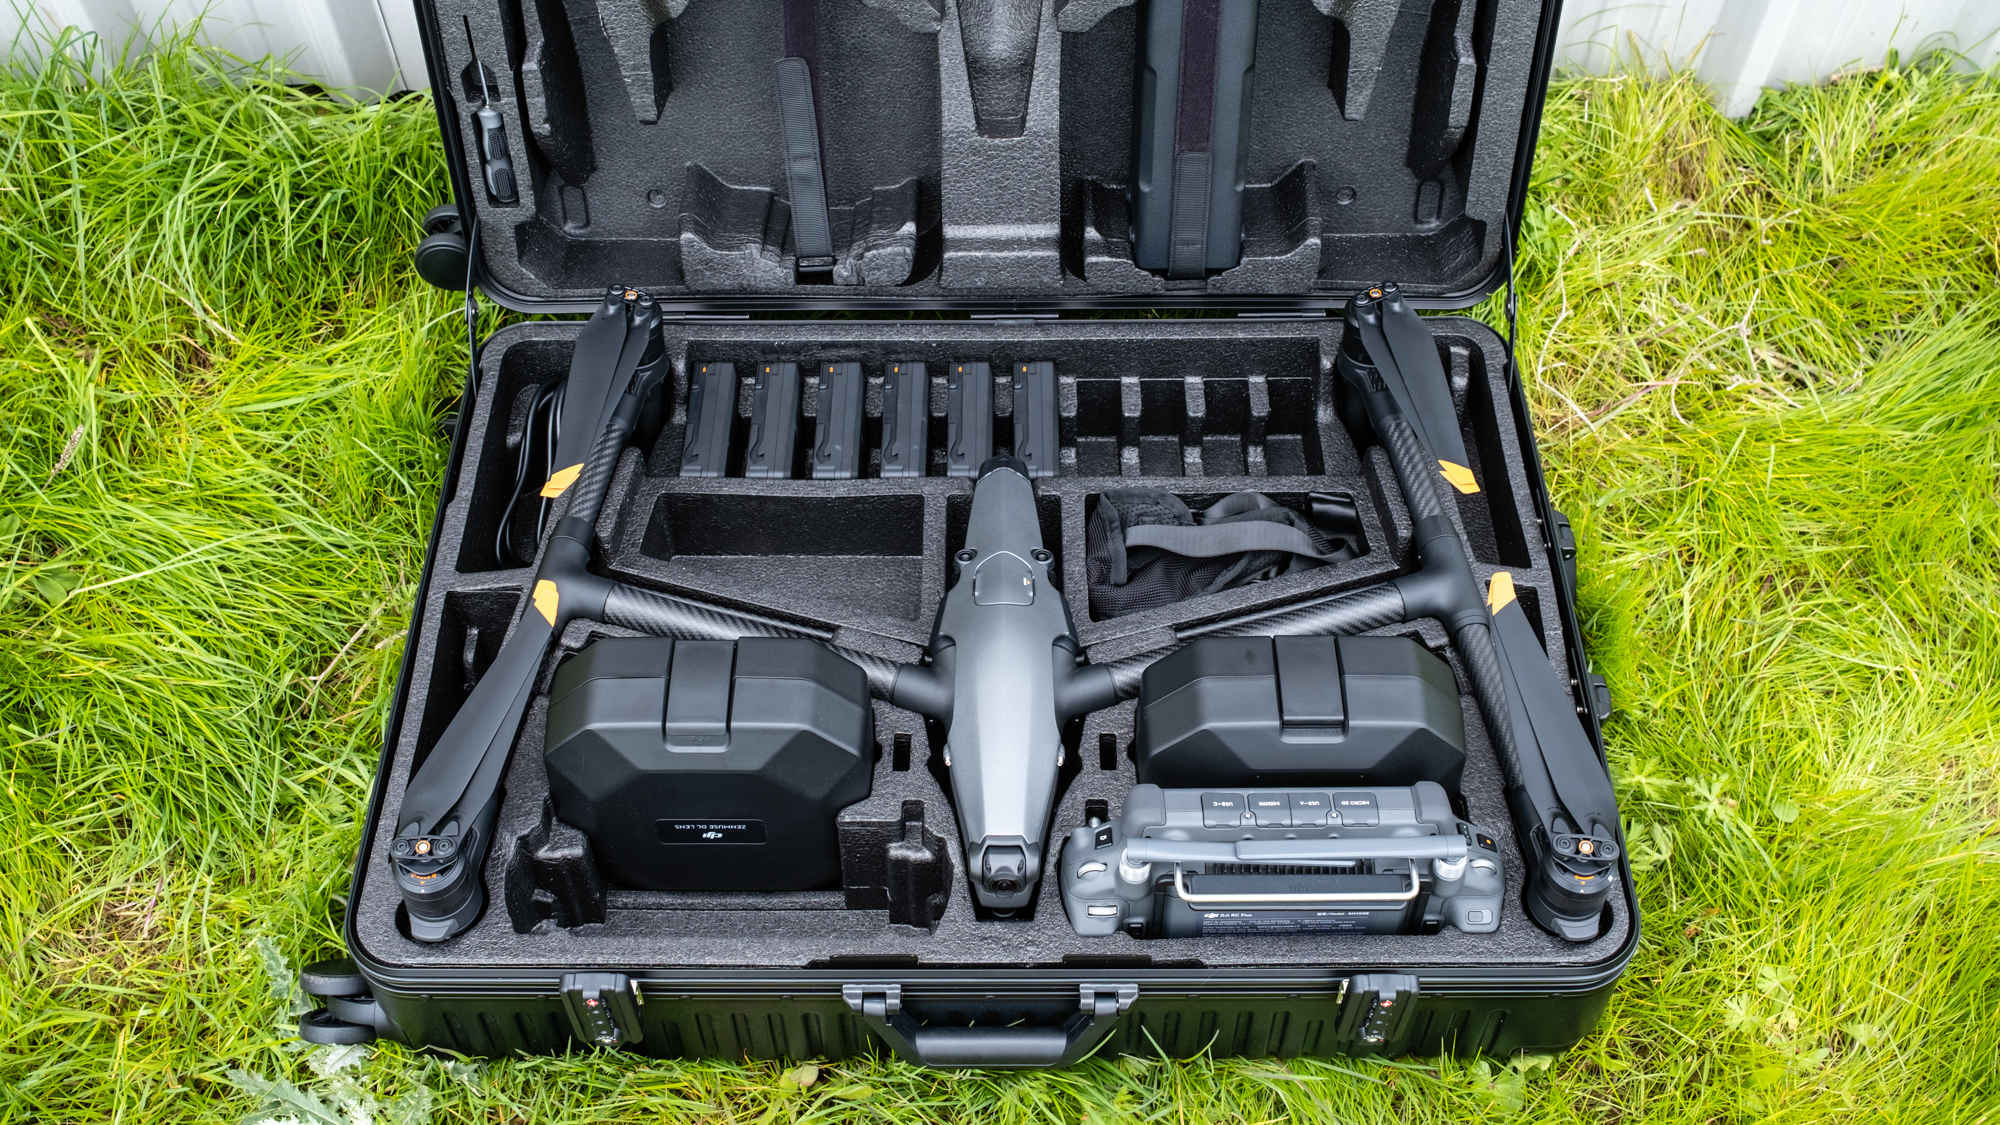 DJI Inspire 3 drone inside its case with accessories